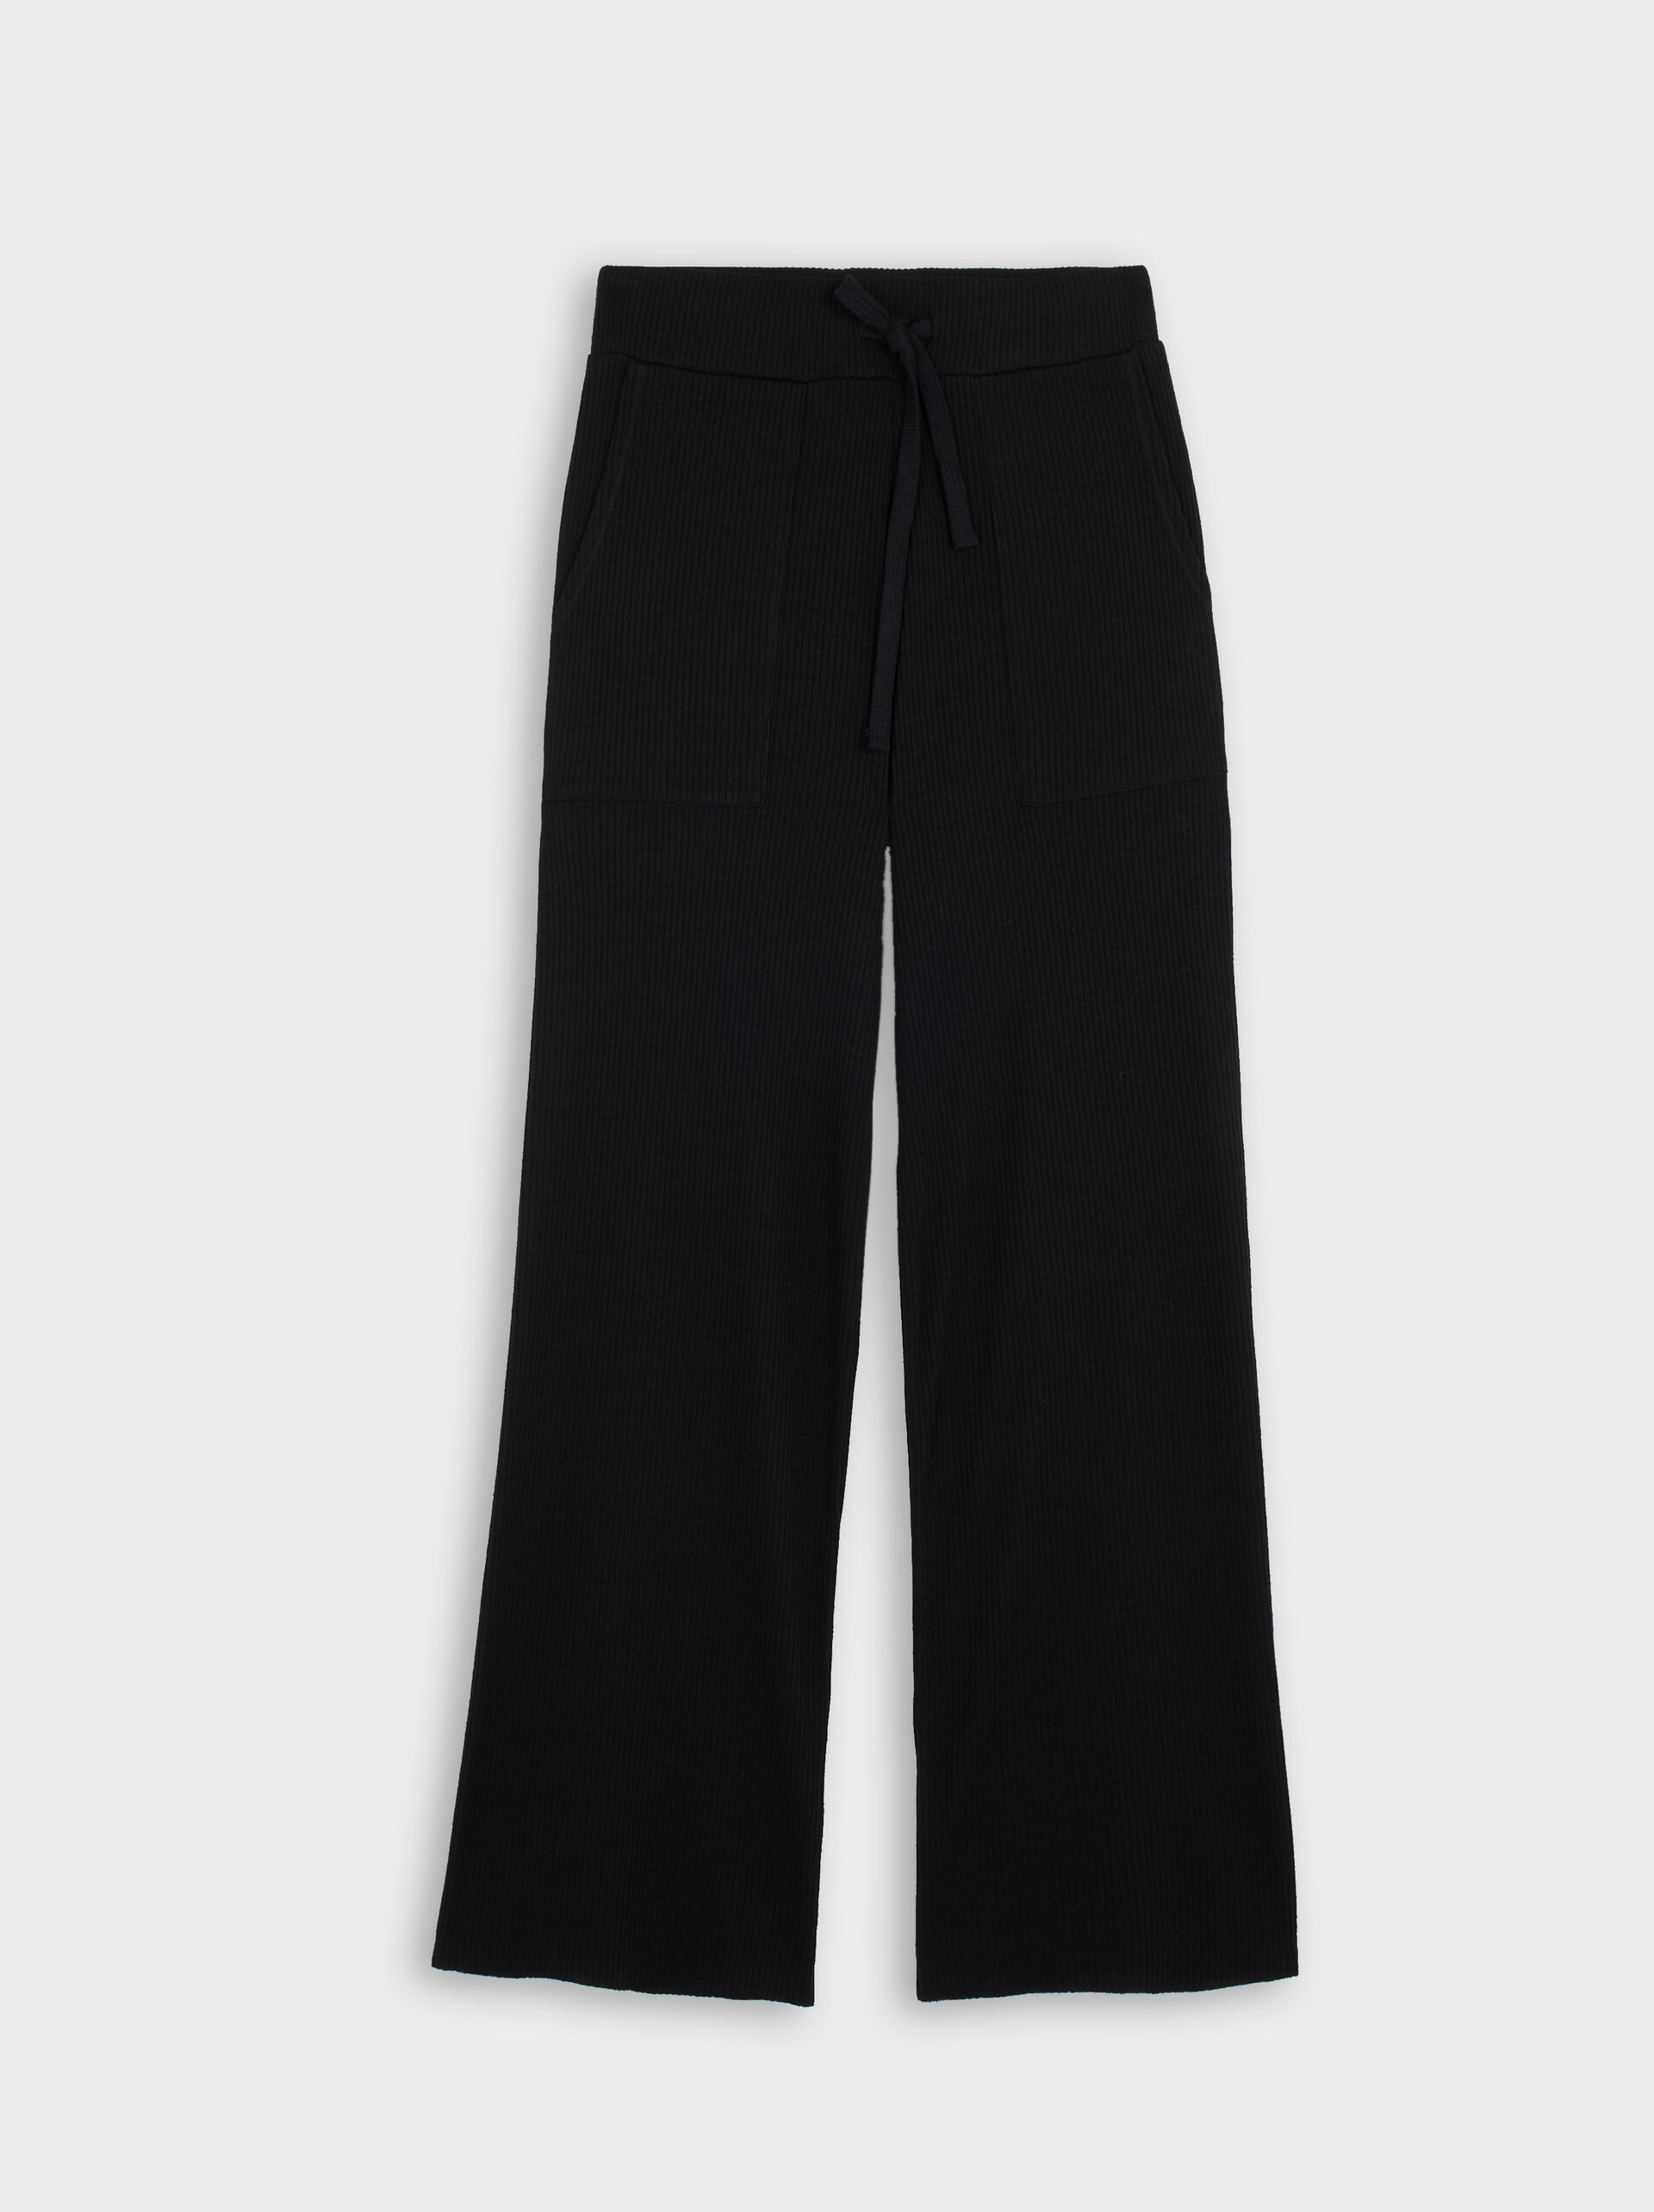 Knit Straight Trousers image number 4.0